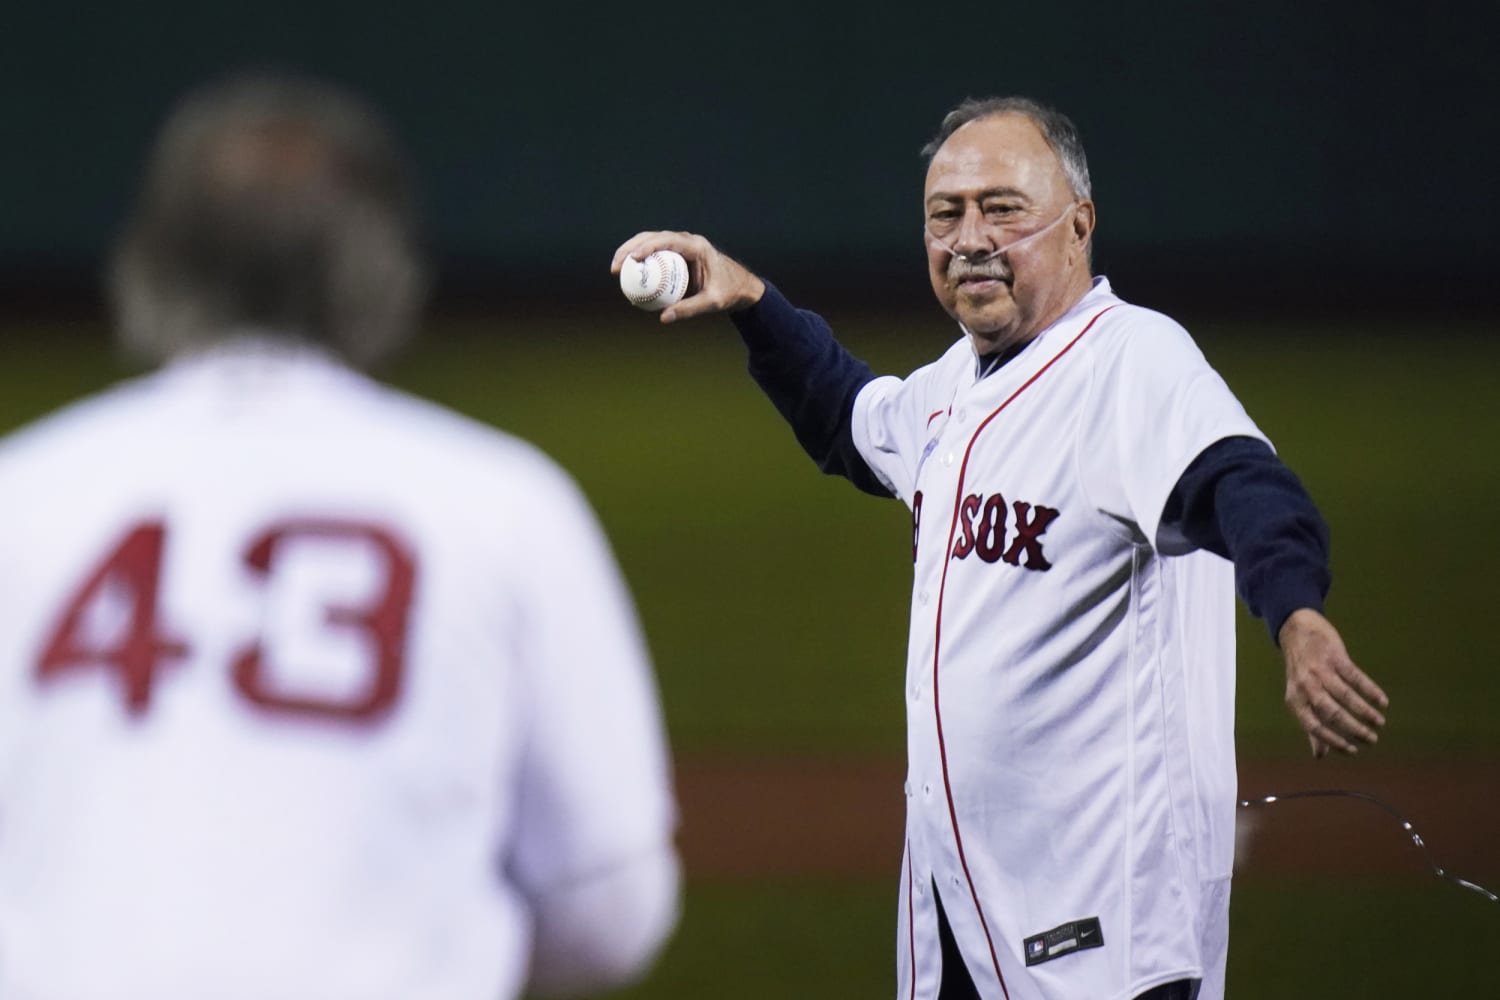 Jerry Remy, Boston Red Sox player and broadcaster, dies at 68